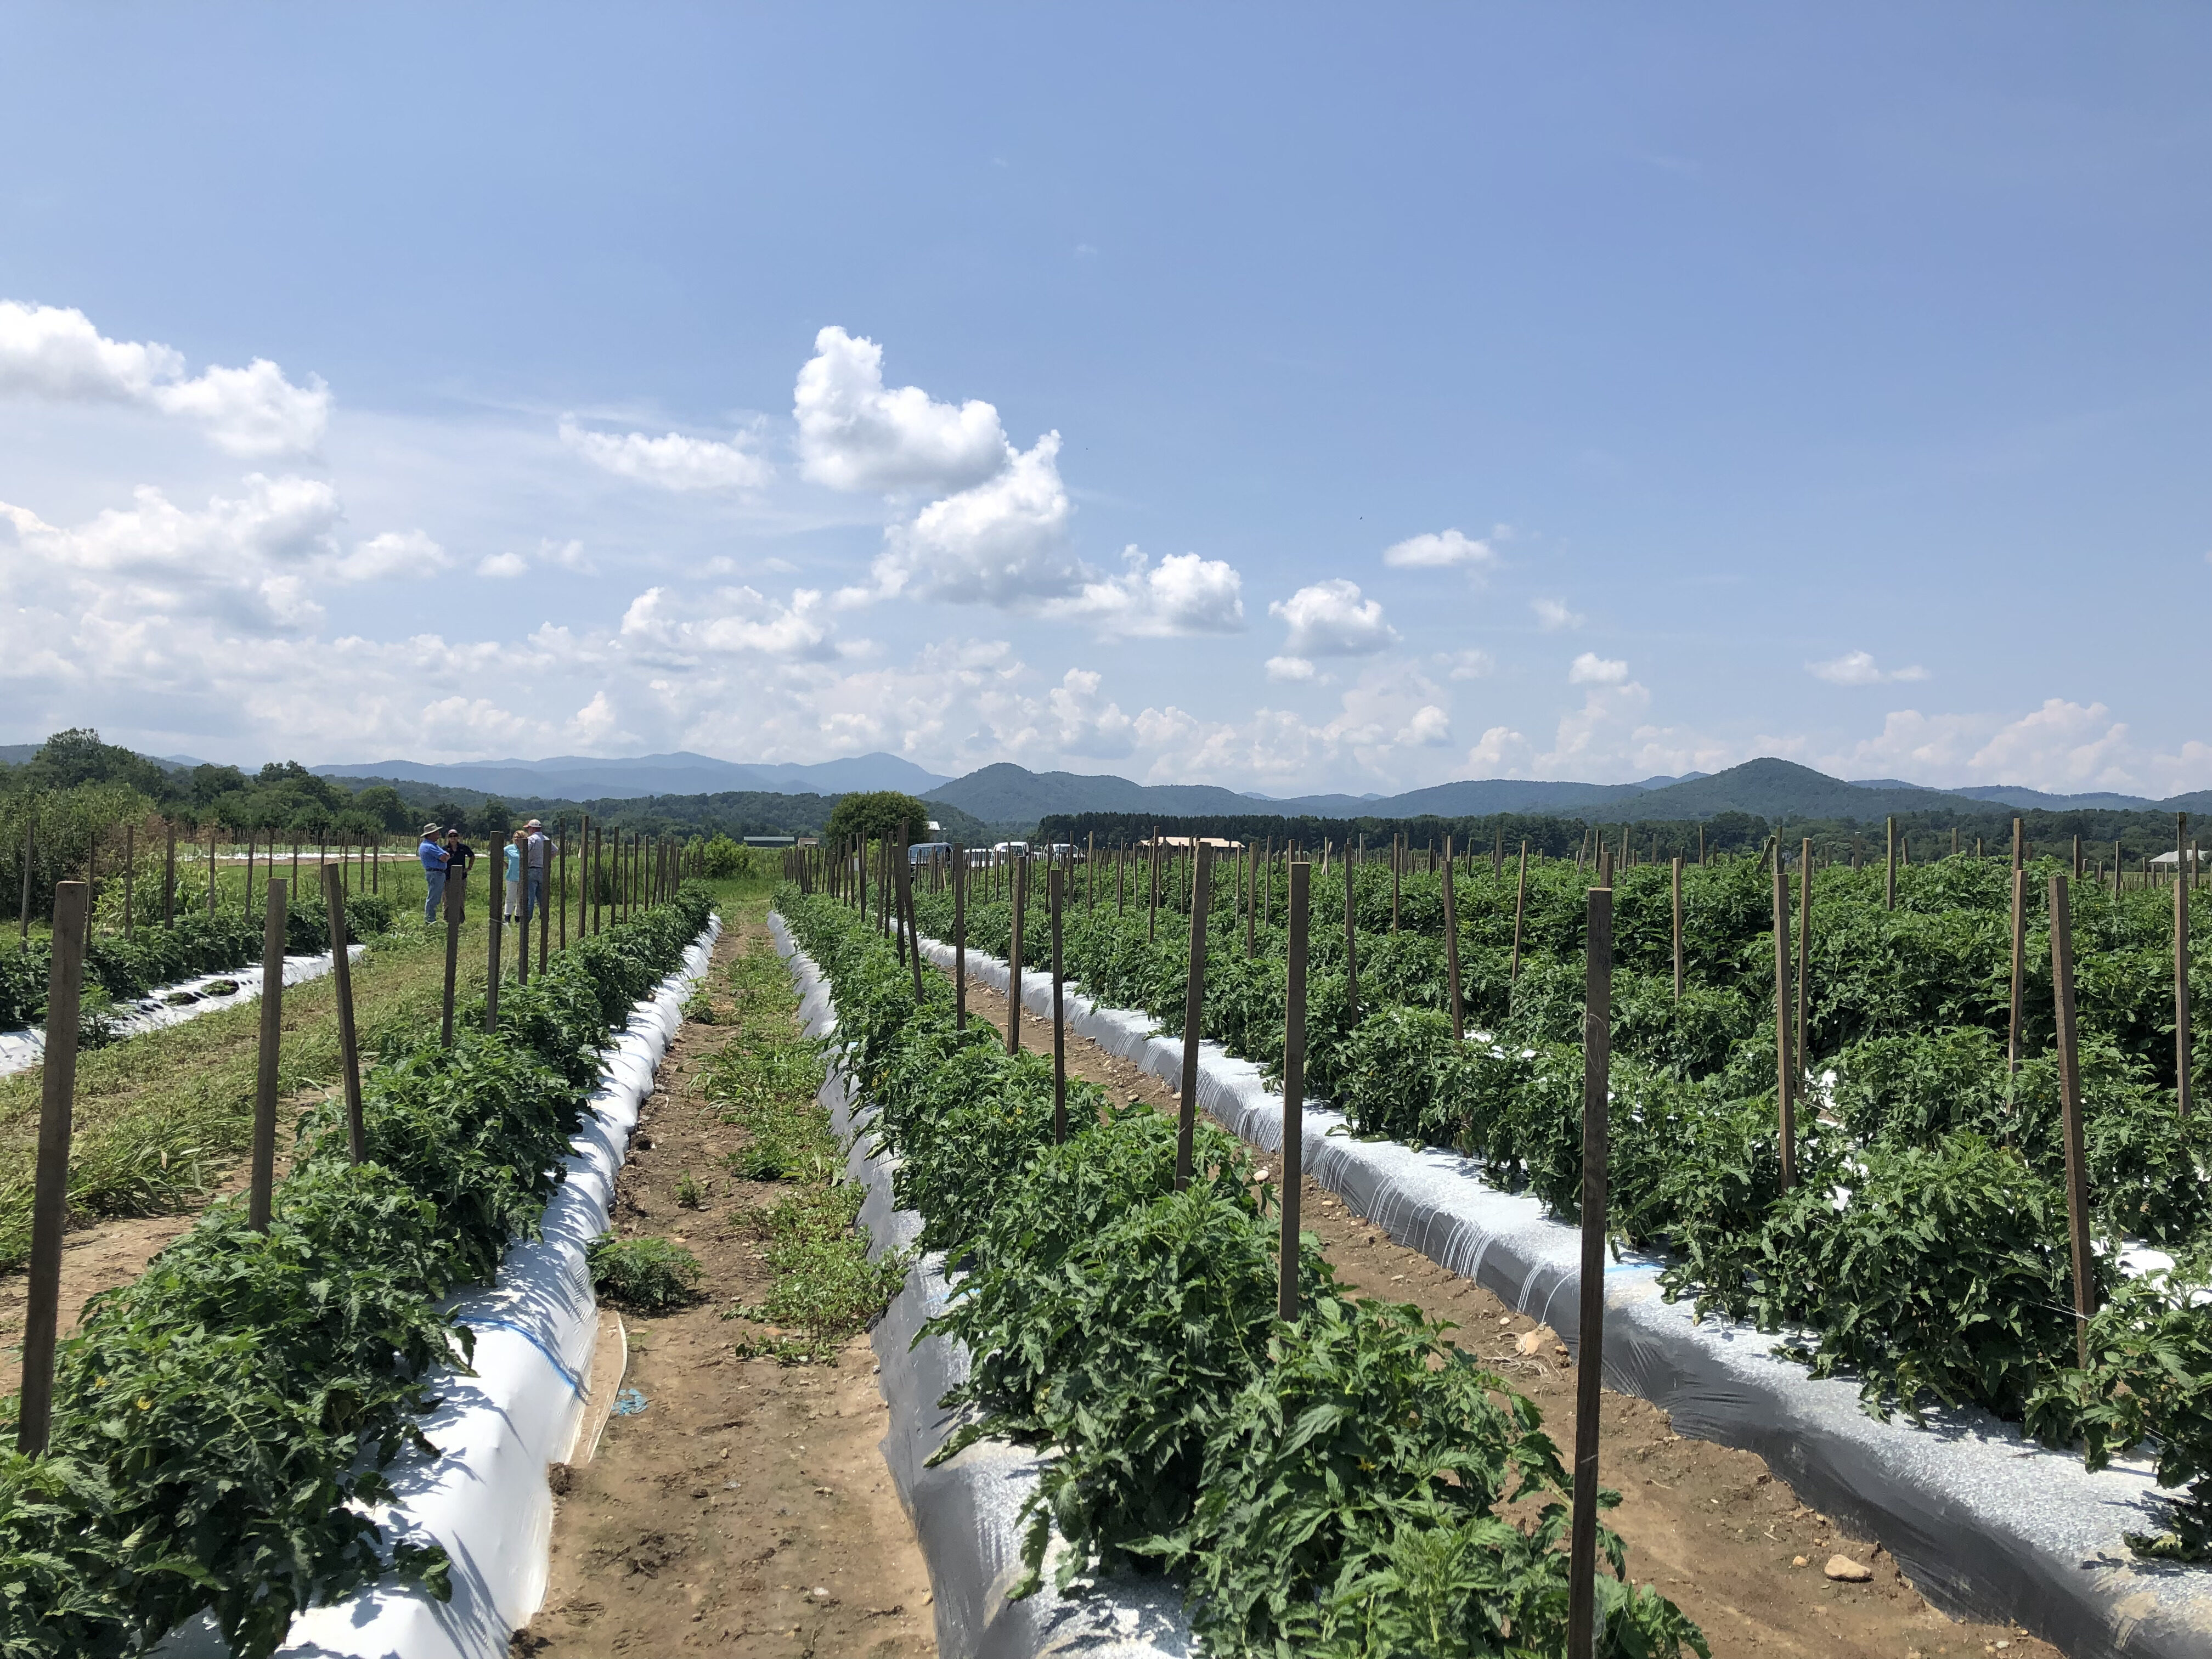 Medium sized, staked tomato plants growing on white plastic in the Mills River Research plots.